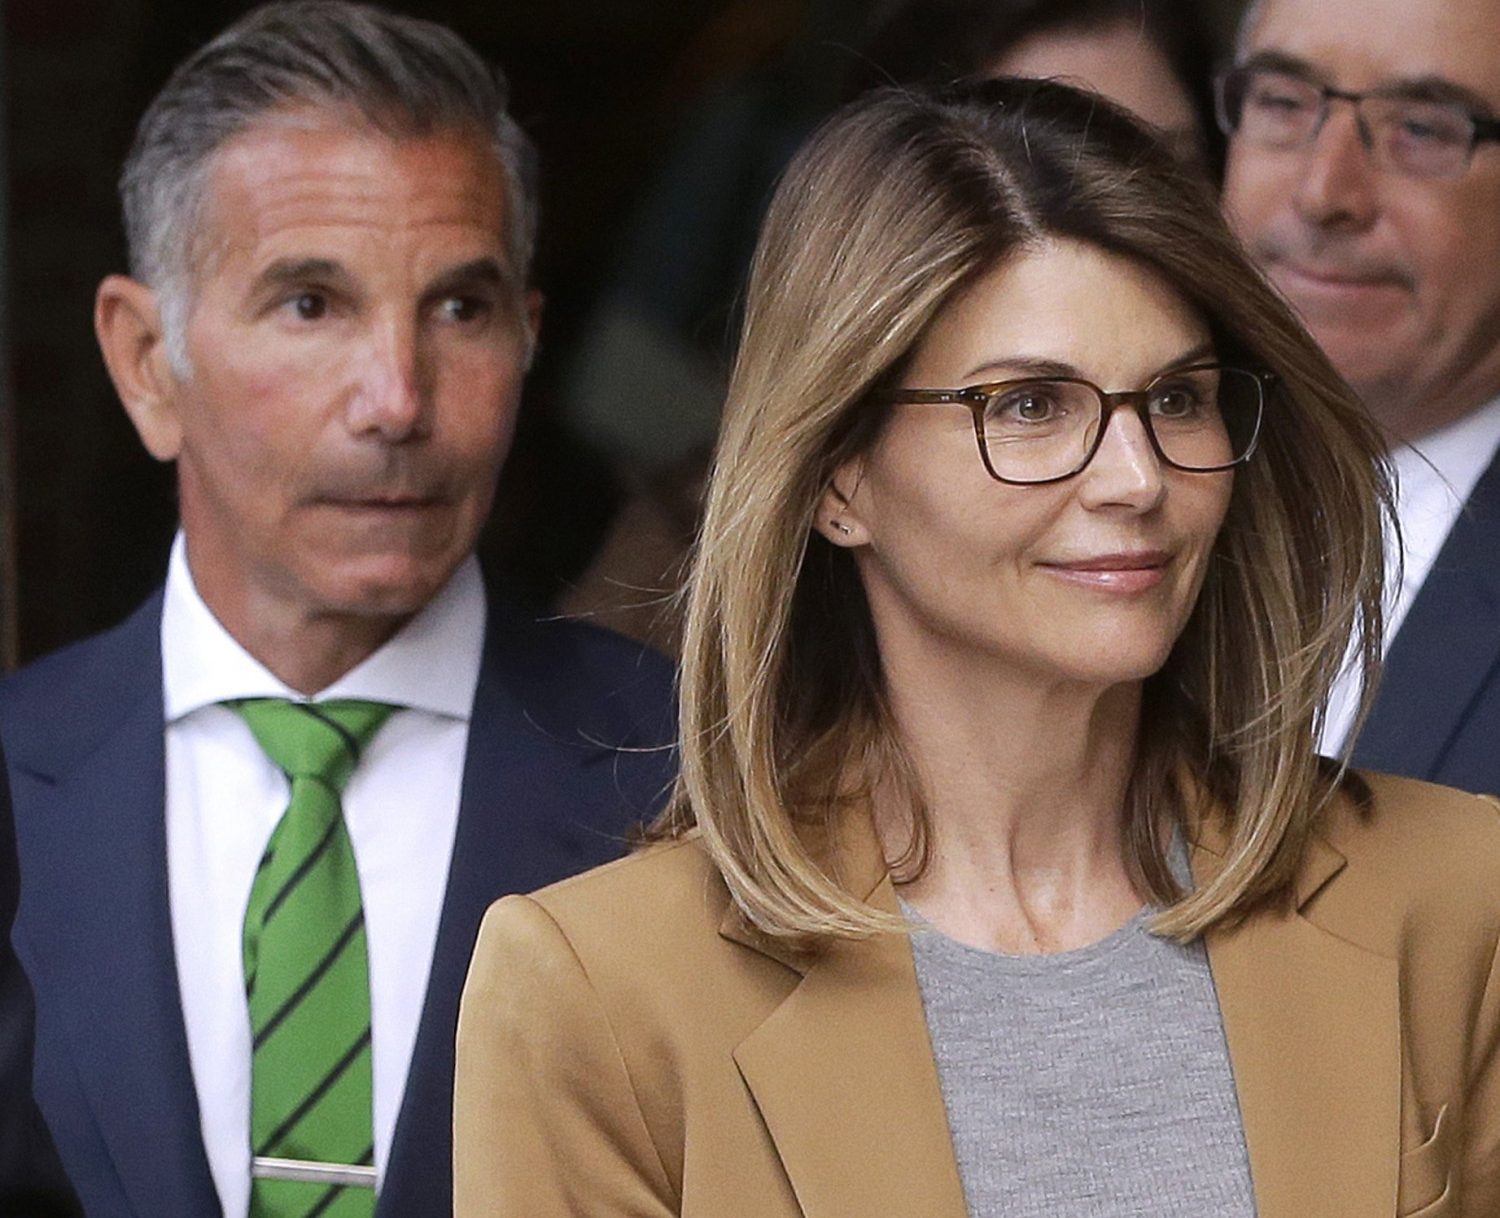 Lori Loughlin and Mossimo Giannulli Could End up in a Court Fight With USC Apart From Admissions Scandal Charges